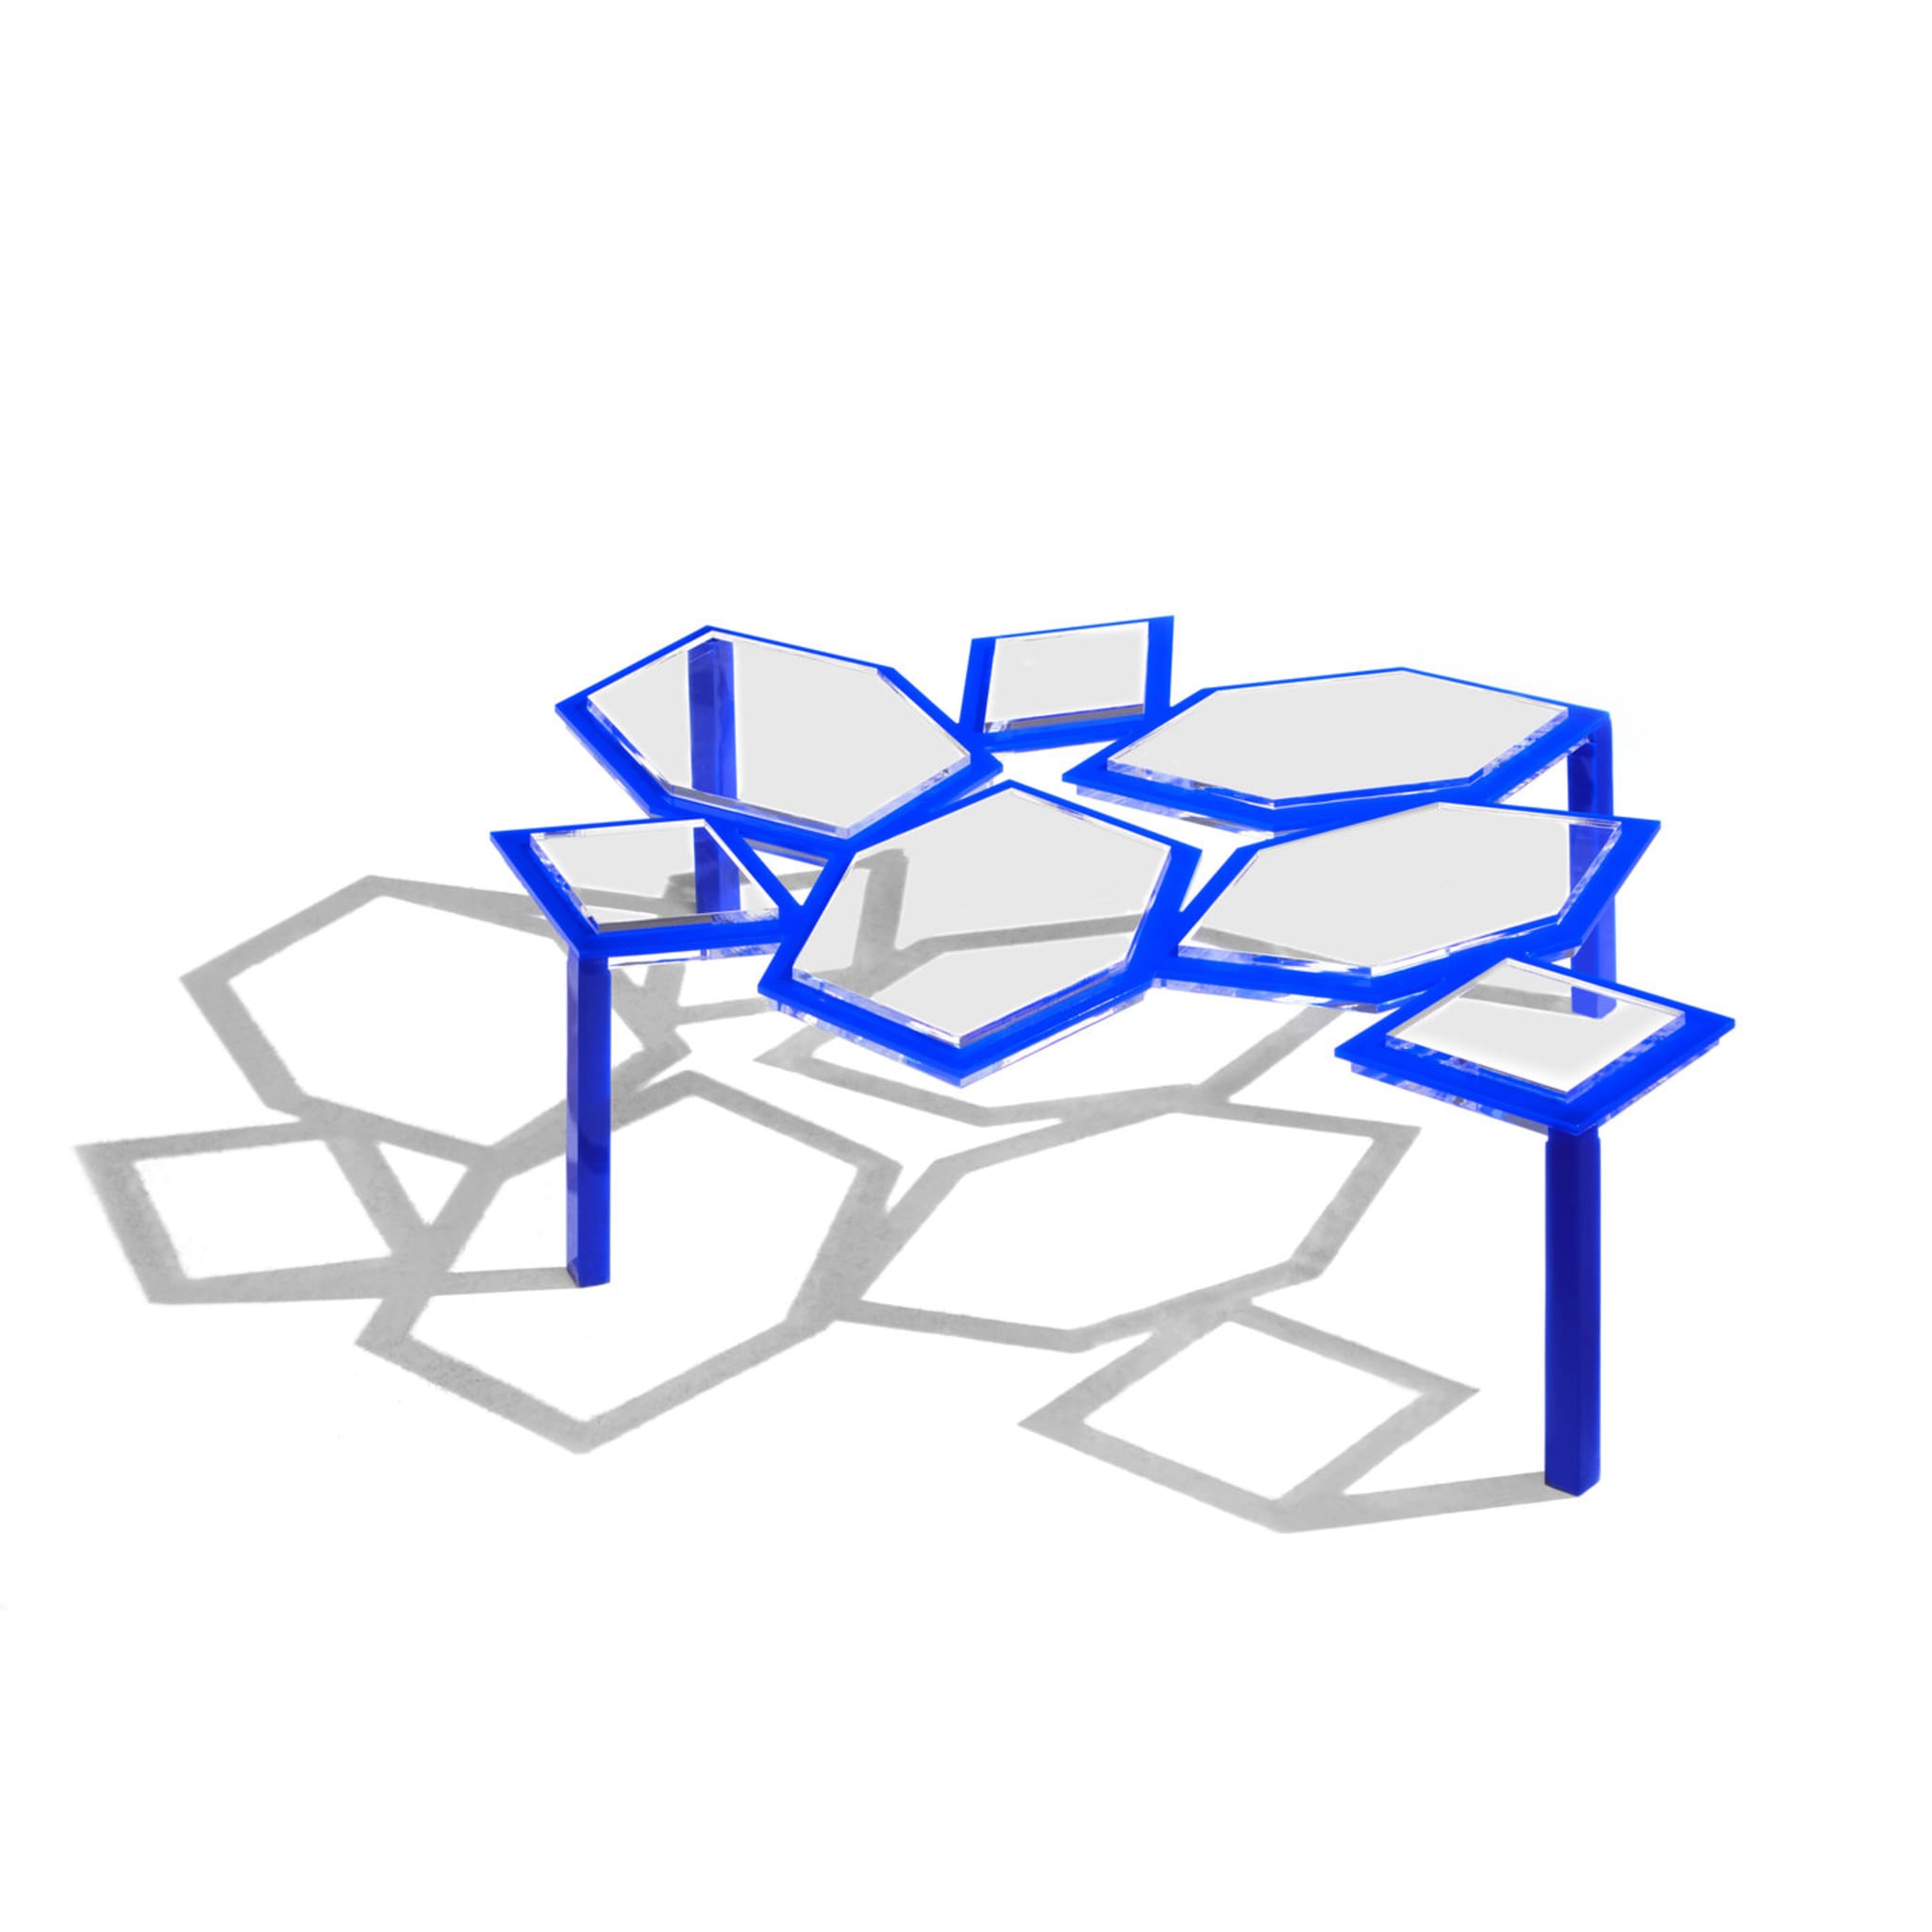 Penrose Small Blue Coffee Table #2 - Alternative view 1